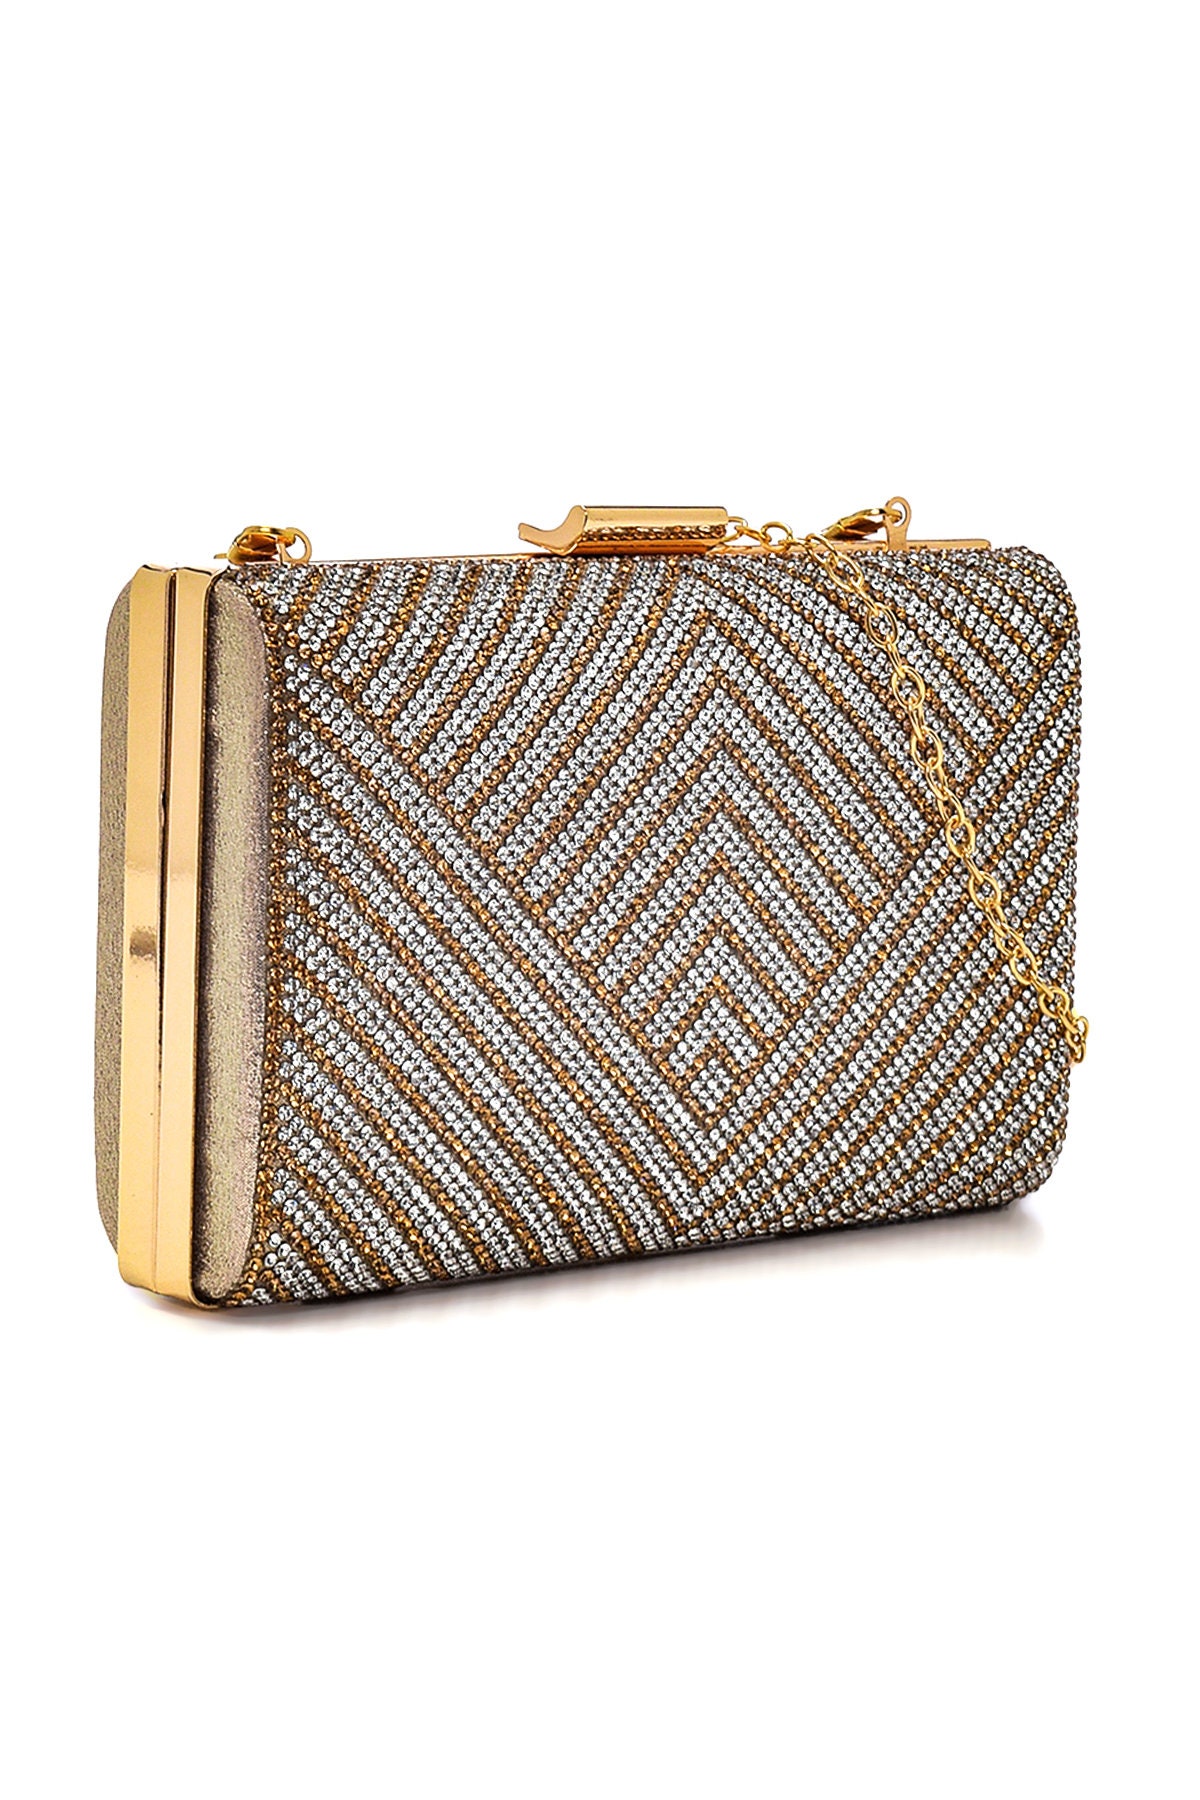 Luxury Gold Clutch Purse For Women Vintage Hollow Carved Evening Bag, Ideal  For Wedding & Prom From Allloves, $37.6